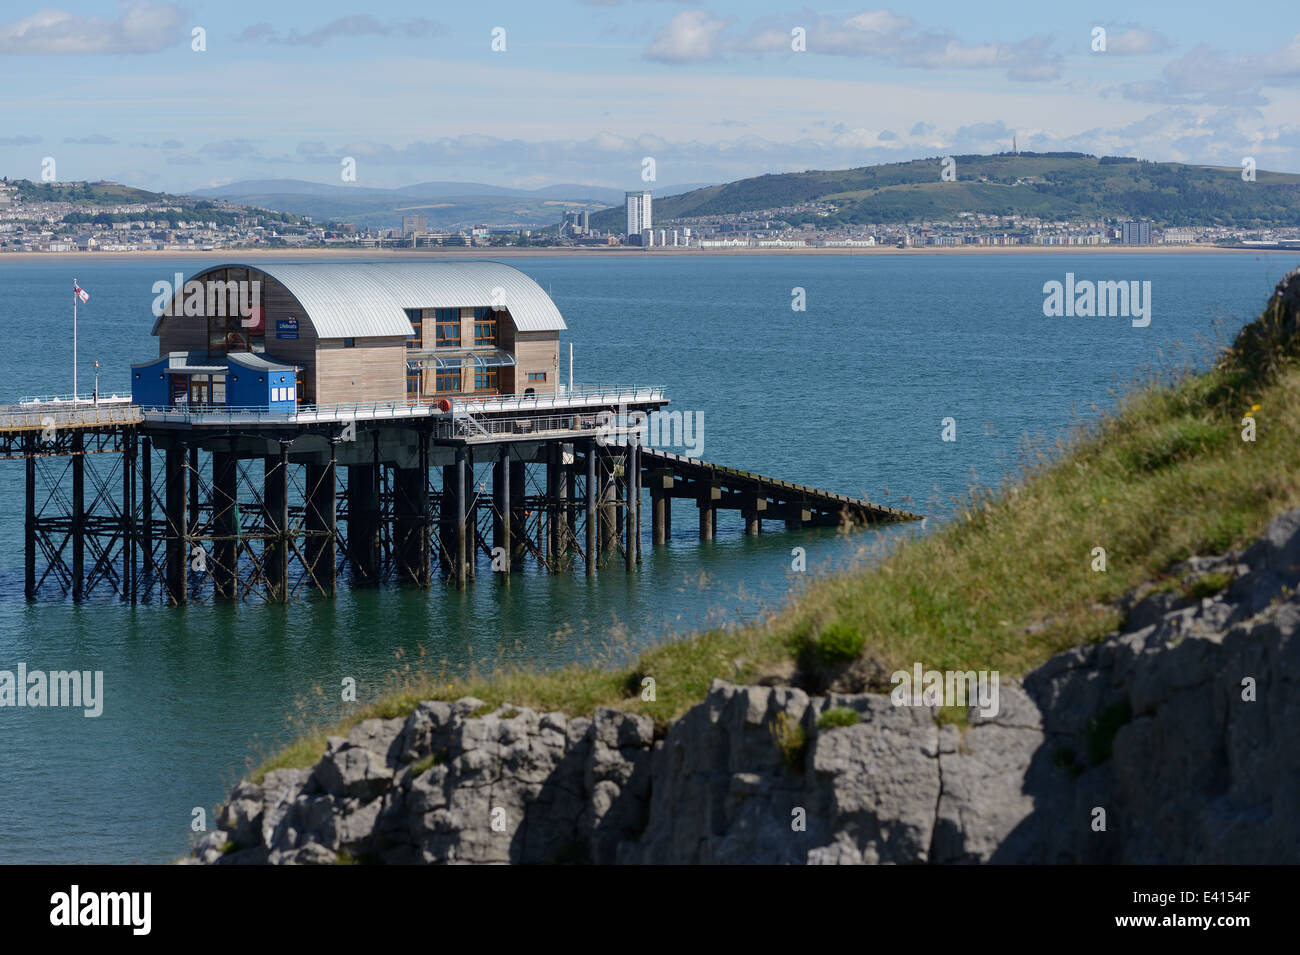 Mumbles lifeboat station with Swansea city ibackground  clear blue water, views to the Brecons, limestone cliff. Mumbles was voted best place to live. Stock Photo